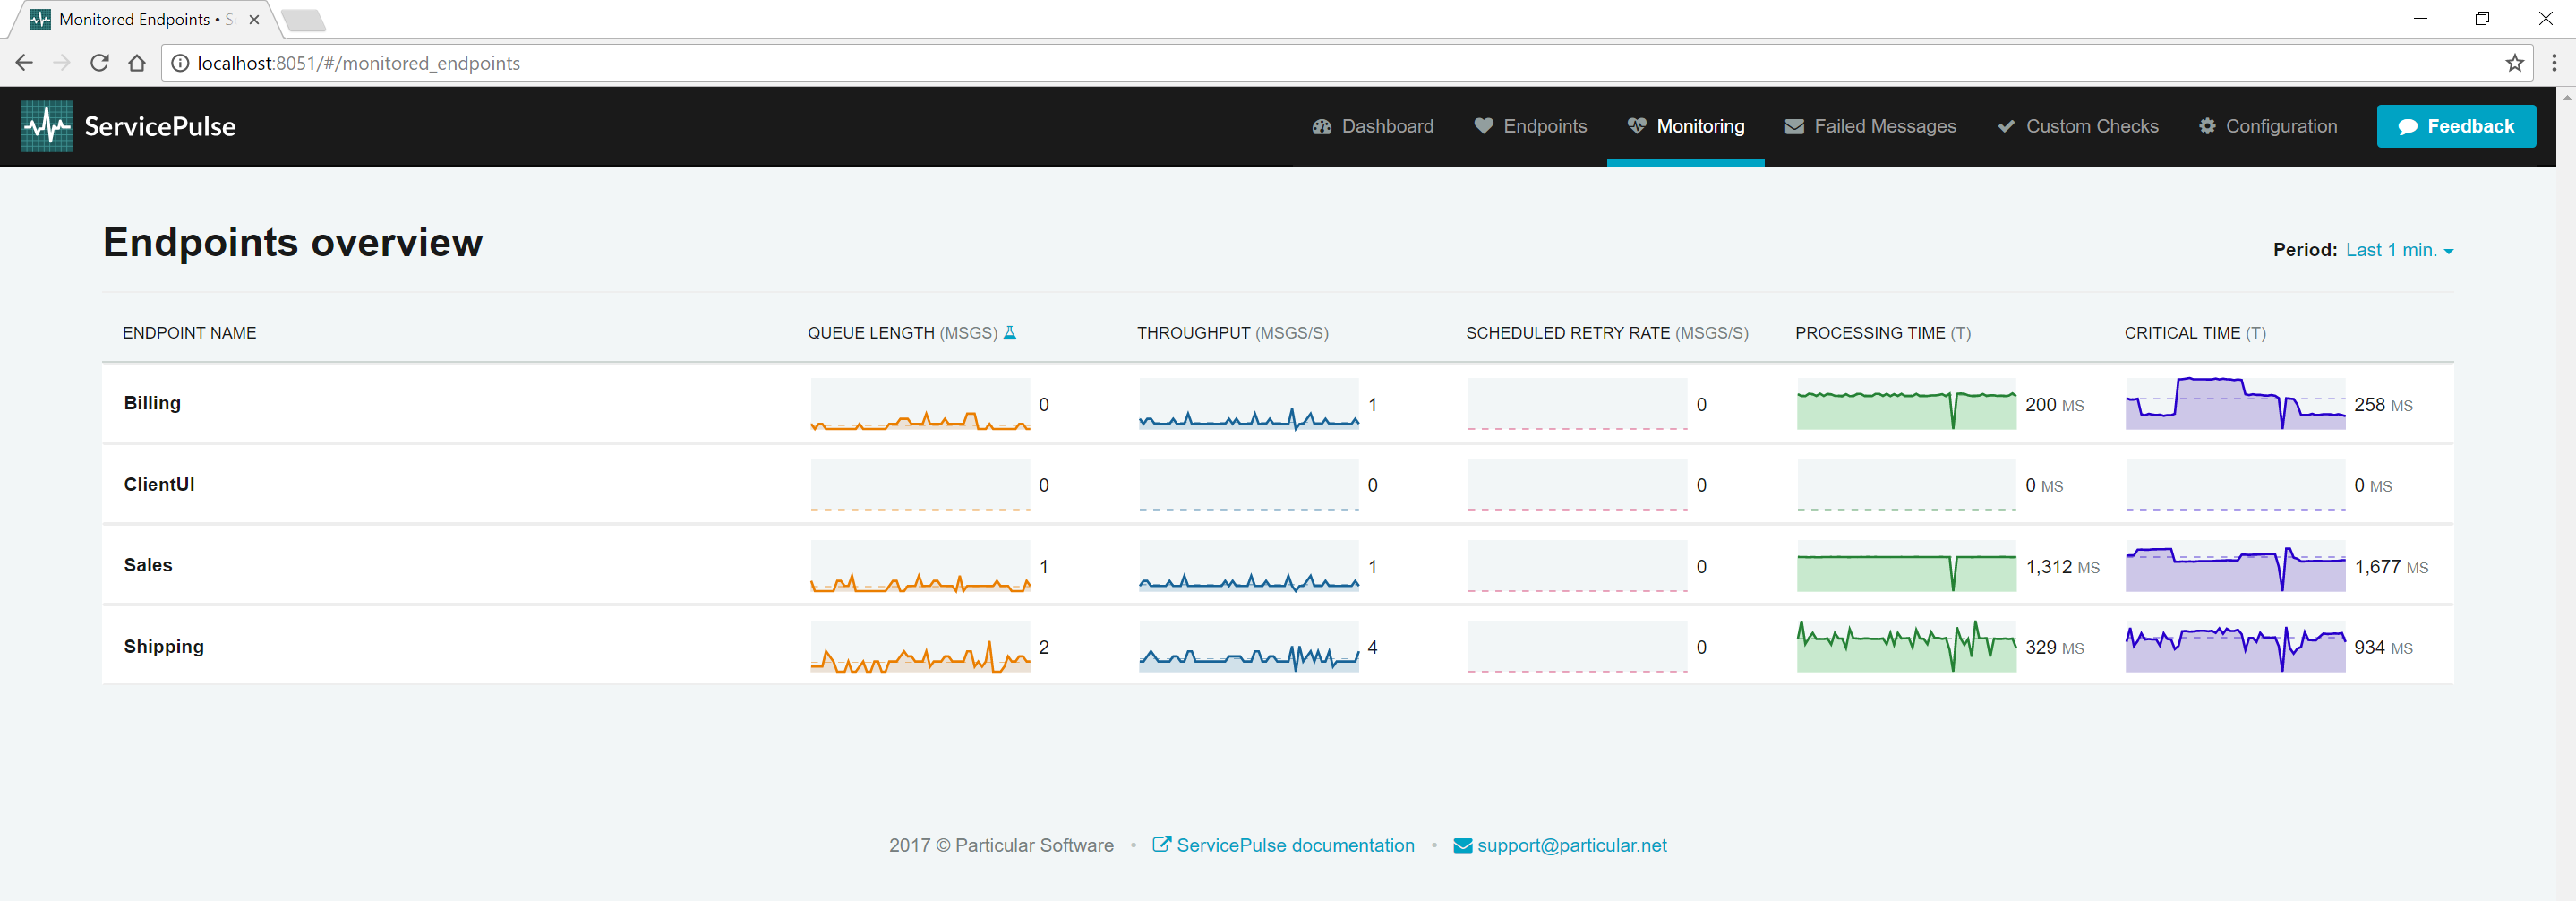 Service Pulse monitoring tab showing sample endpoints